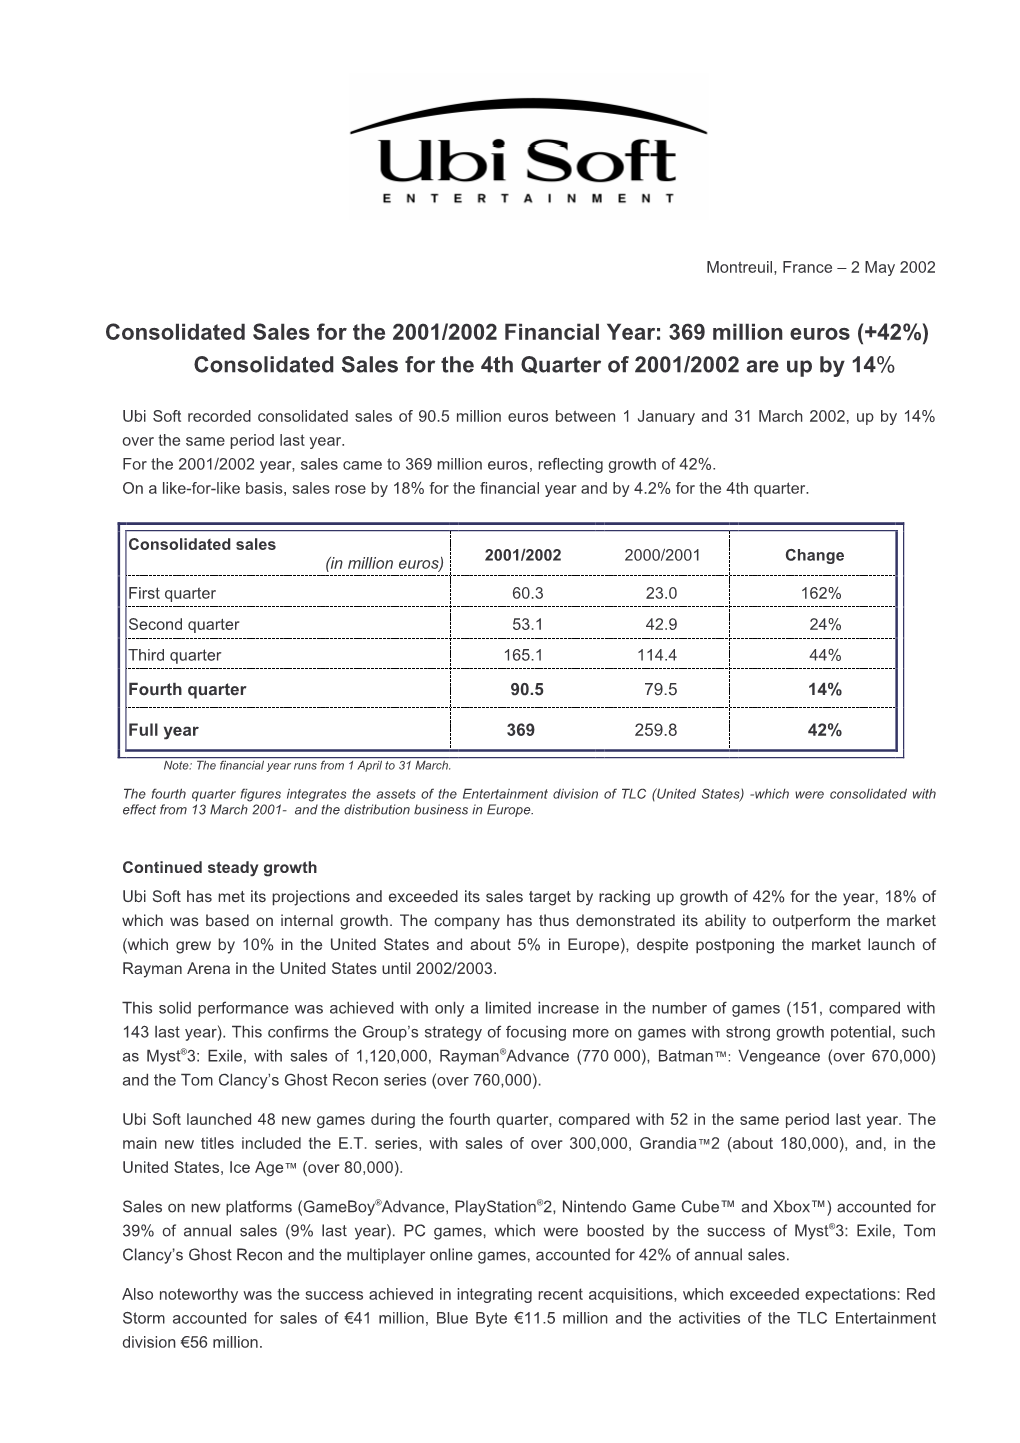 Consolidated Sales for the 2001/2002 Financial Year: 369 Million Euros (+42%) Consolidated Sales for the 4Th Quarter of 2001/2002 Are up by 14 %